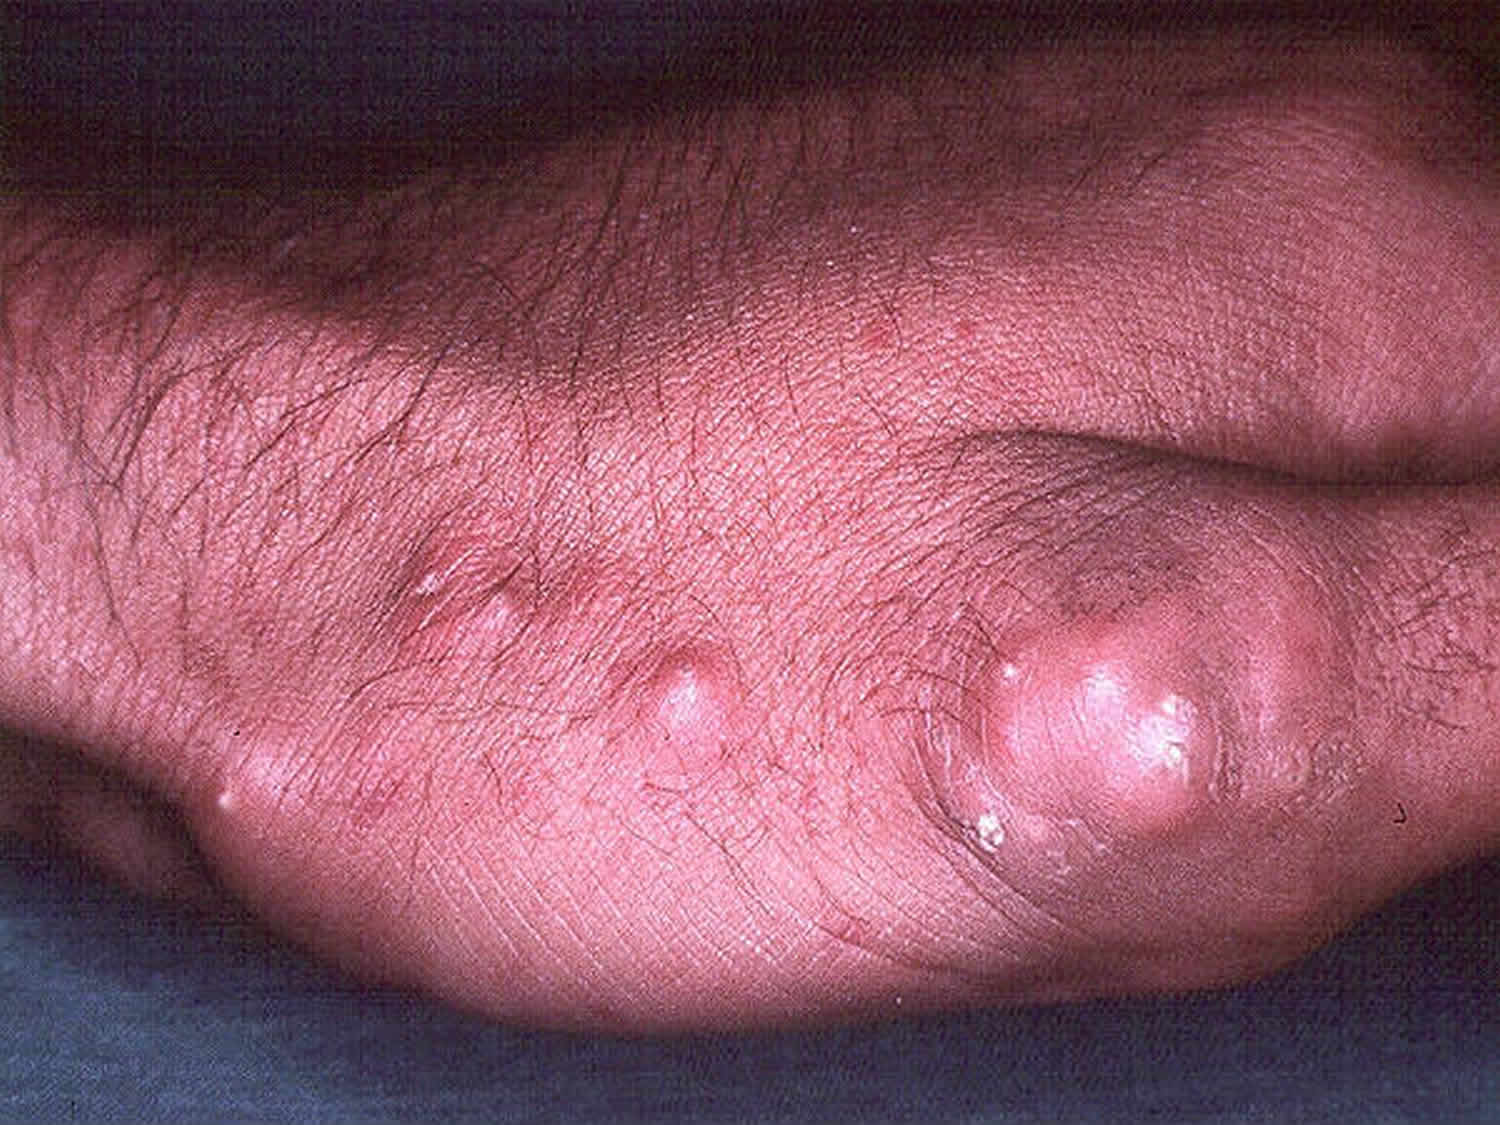 CREST syndrome